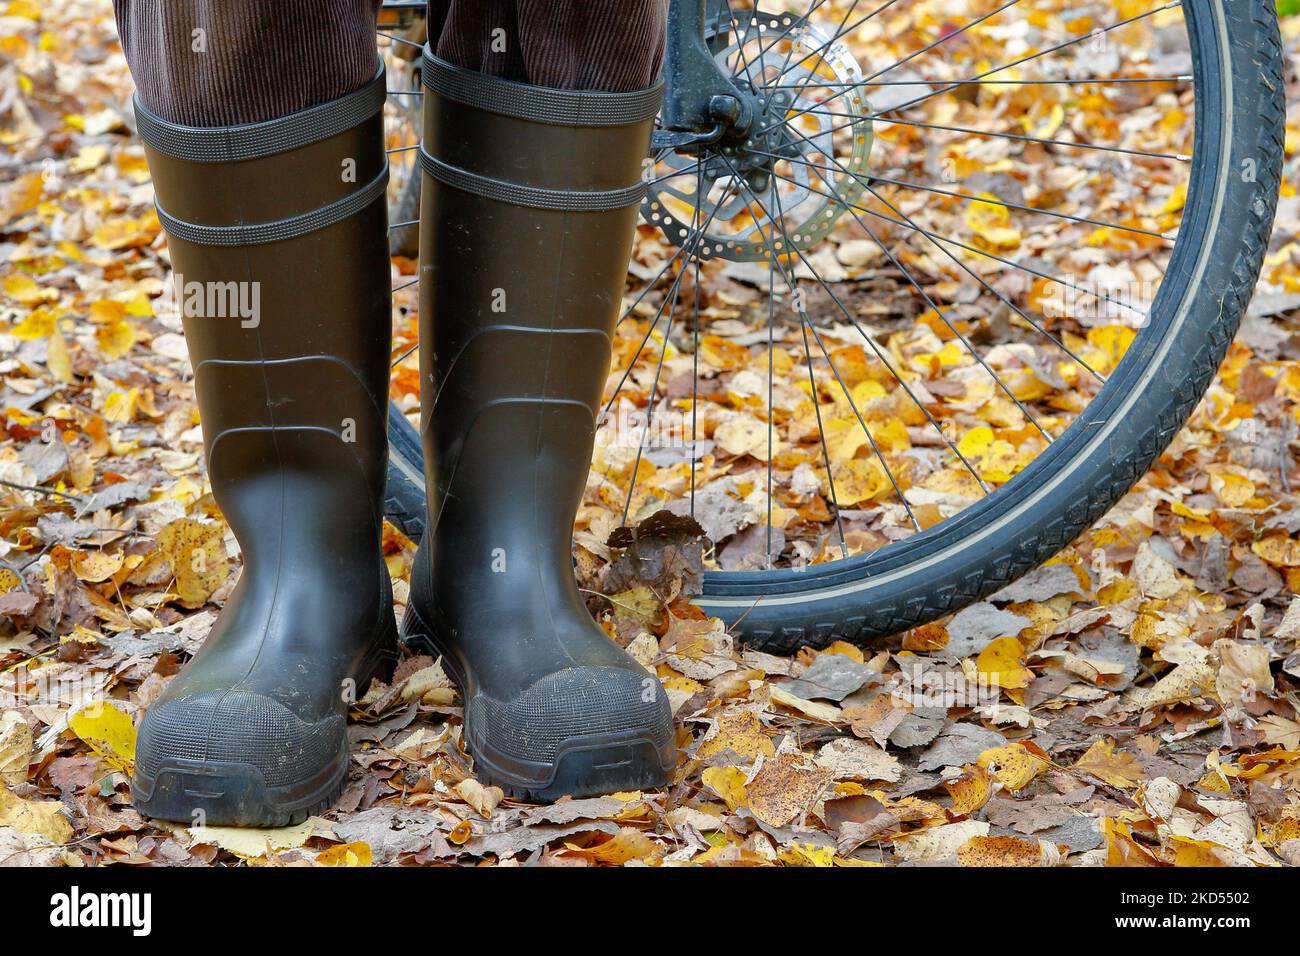 With dry feet on the bike through autumn. Cyclist stands in rubber boots in colorful foliage in front of a bicycle tire. Stock Photo